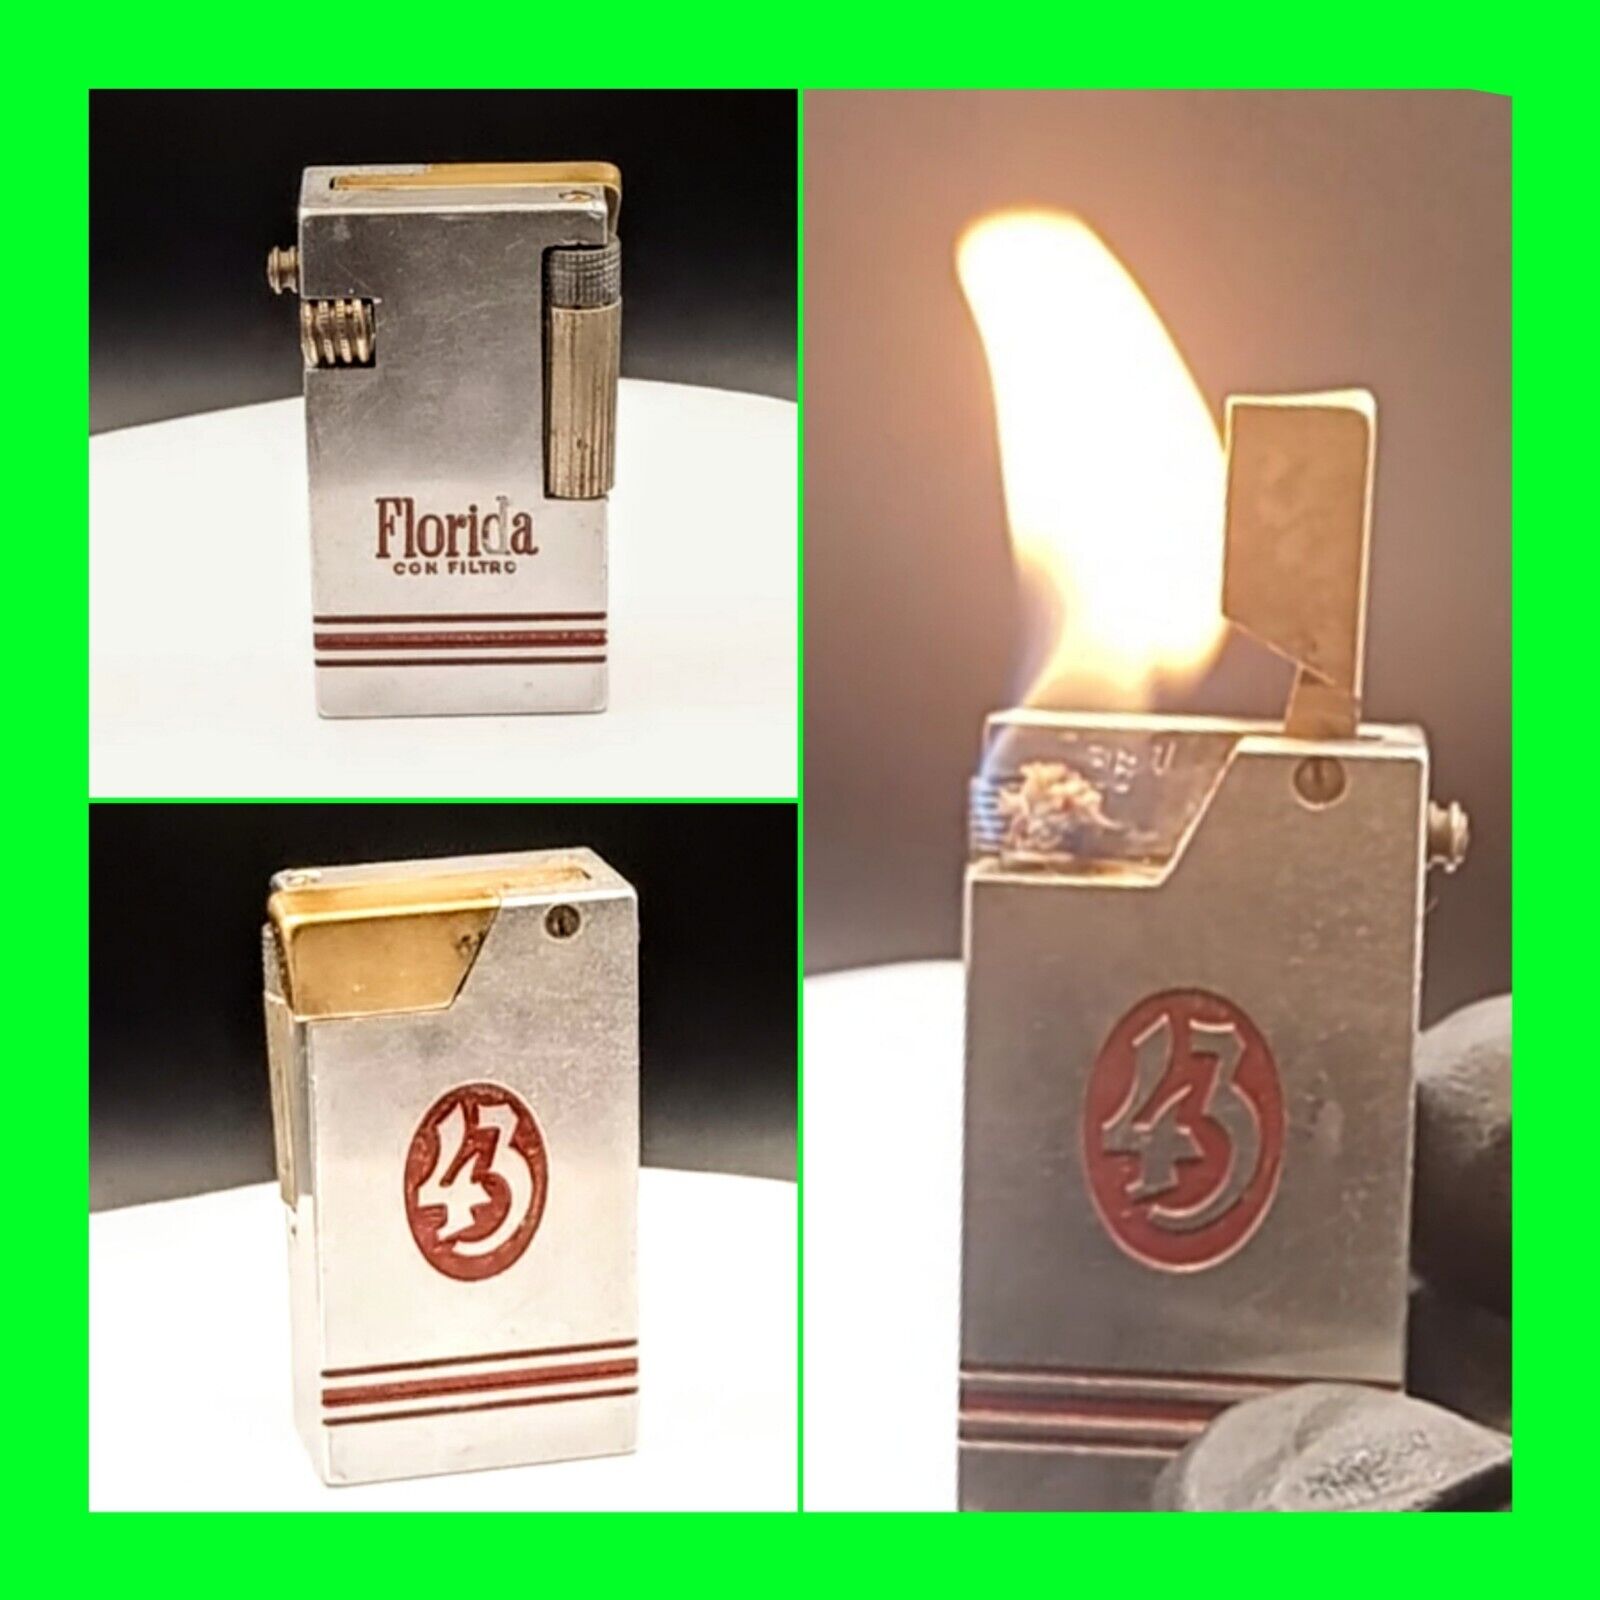 Rare Vintage Florida 43 Cigarettes Advertising Petrol Lighter - In Working Cond.